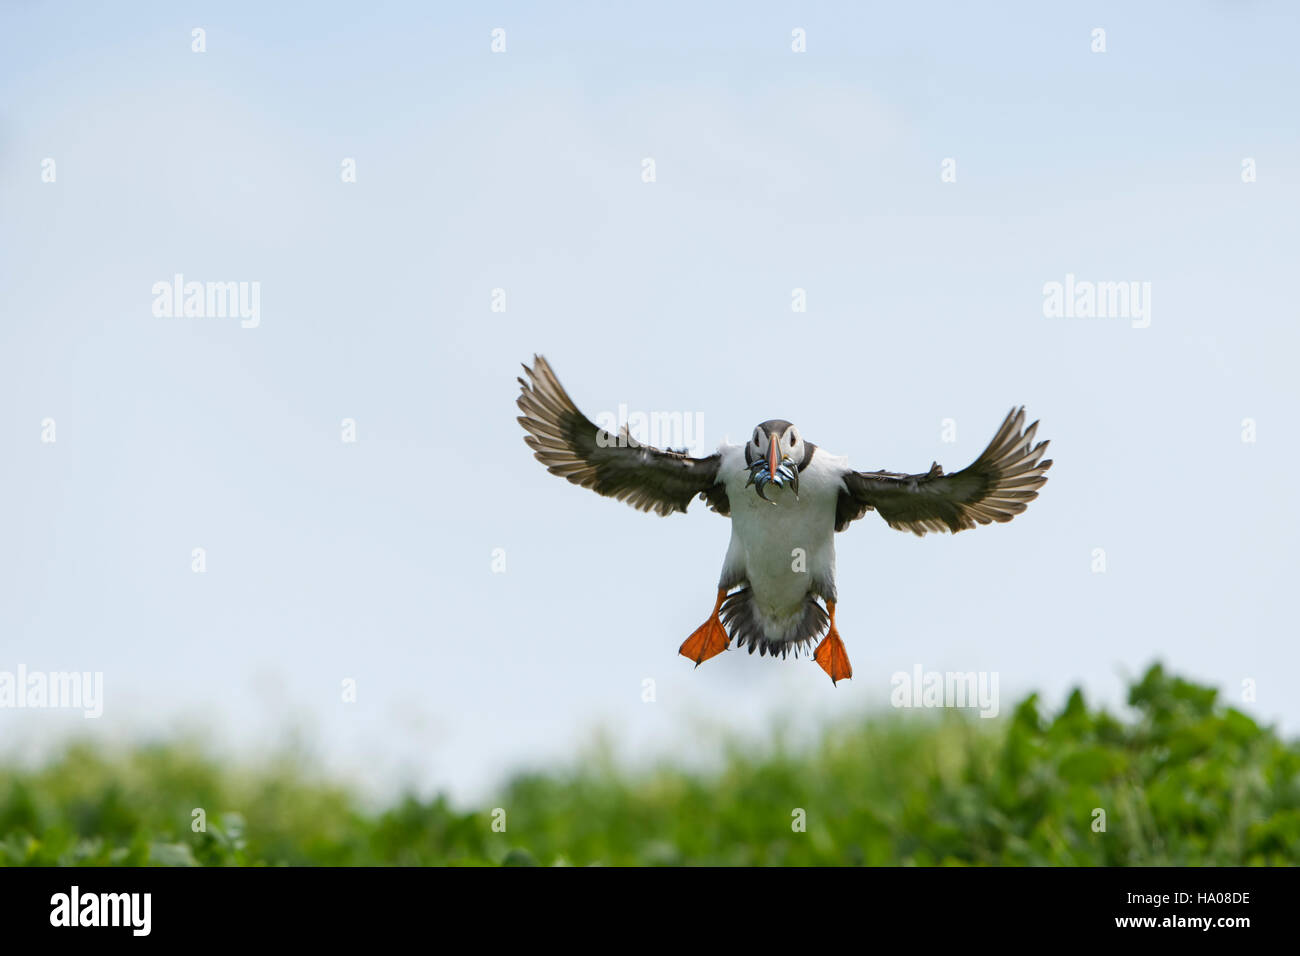 An atlantic puffin (Fratercula arctica) in flight with a beak full of sandeels for young, Farne Islands, Northumberland, UK Stock Photo